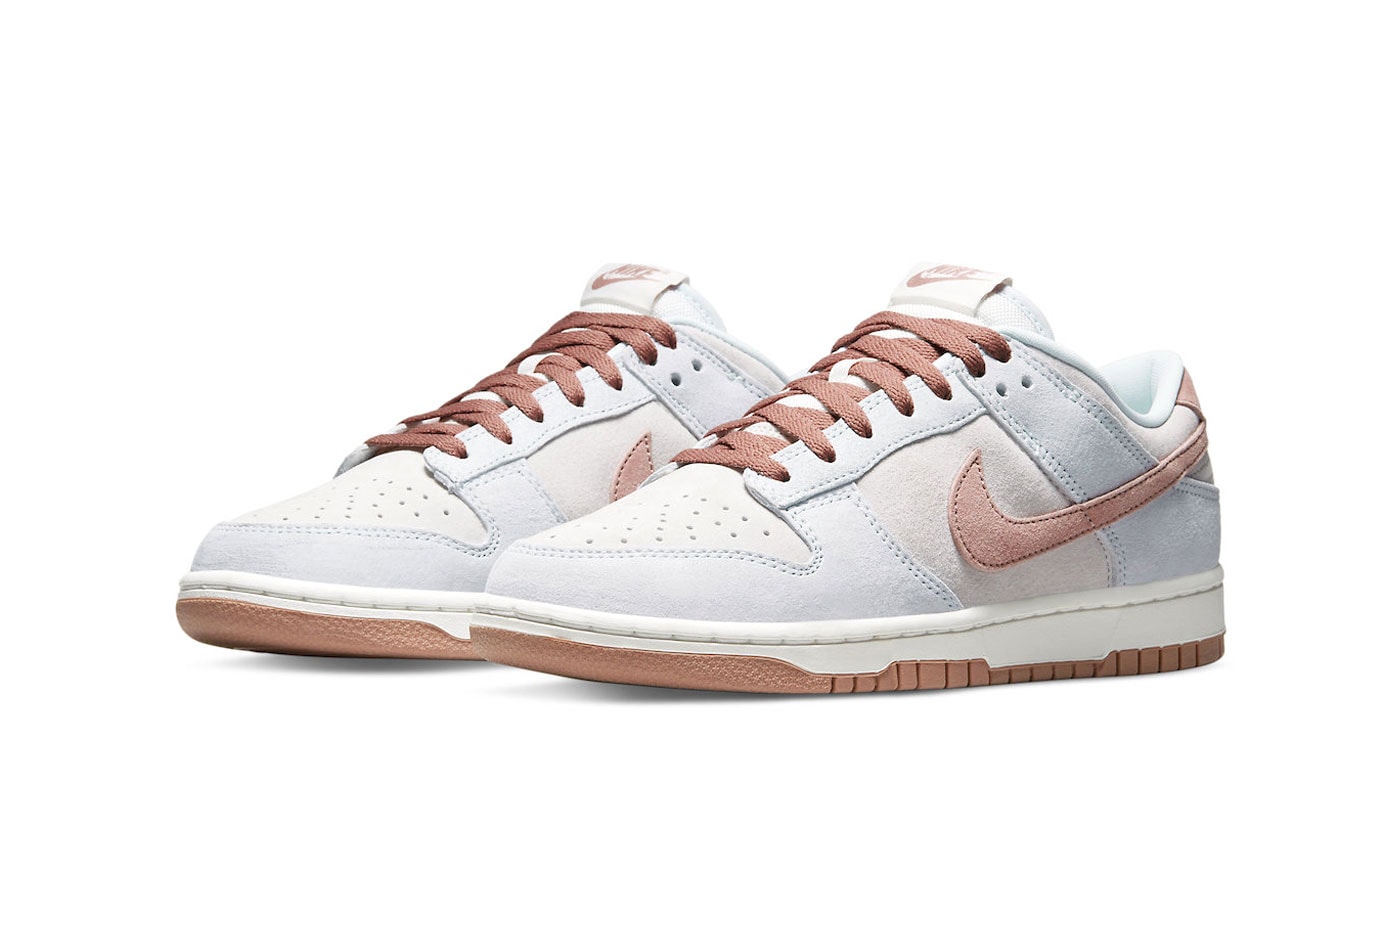 Nike dunk high low fossil rose DH7577 001 pink white gum brown light blue release info